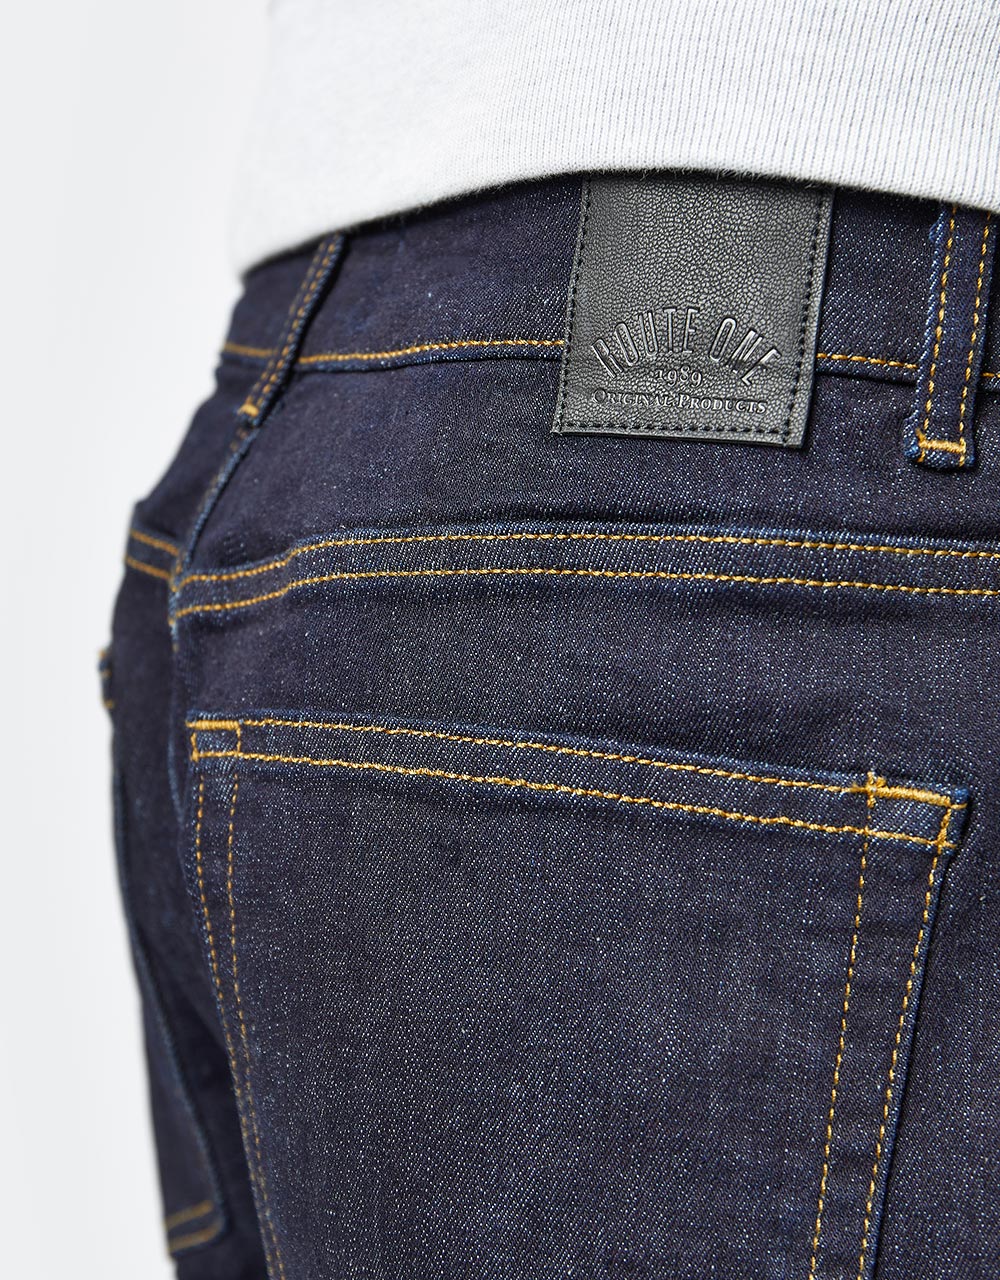 Route One Super Baggy Denim Jeans - Moderate Purple